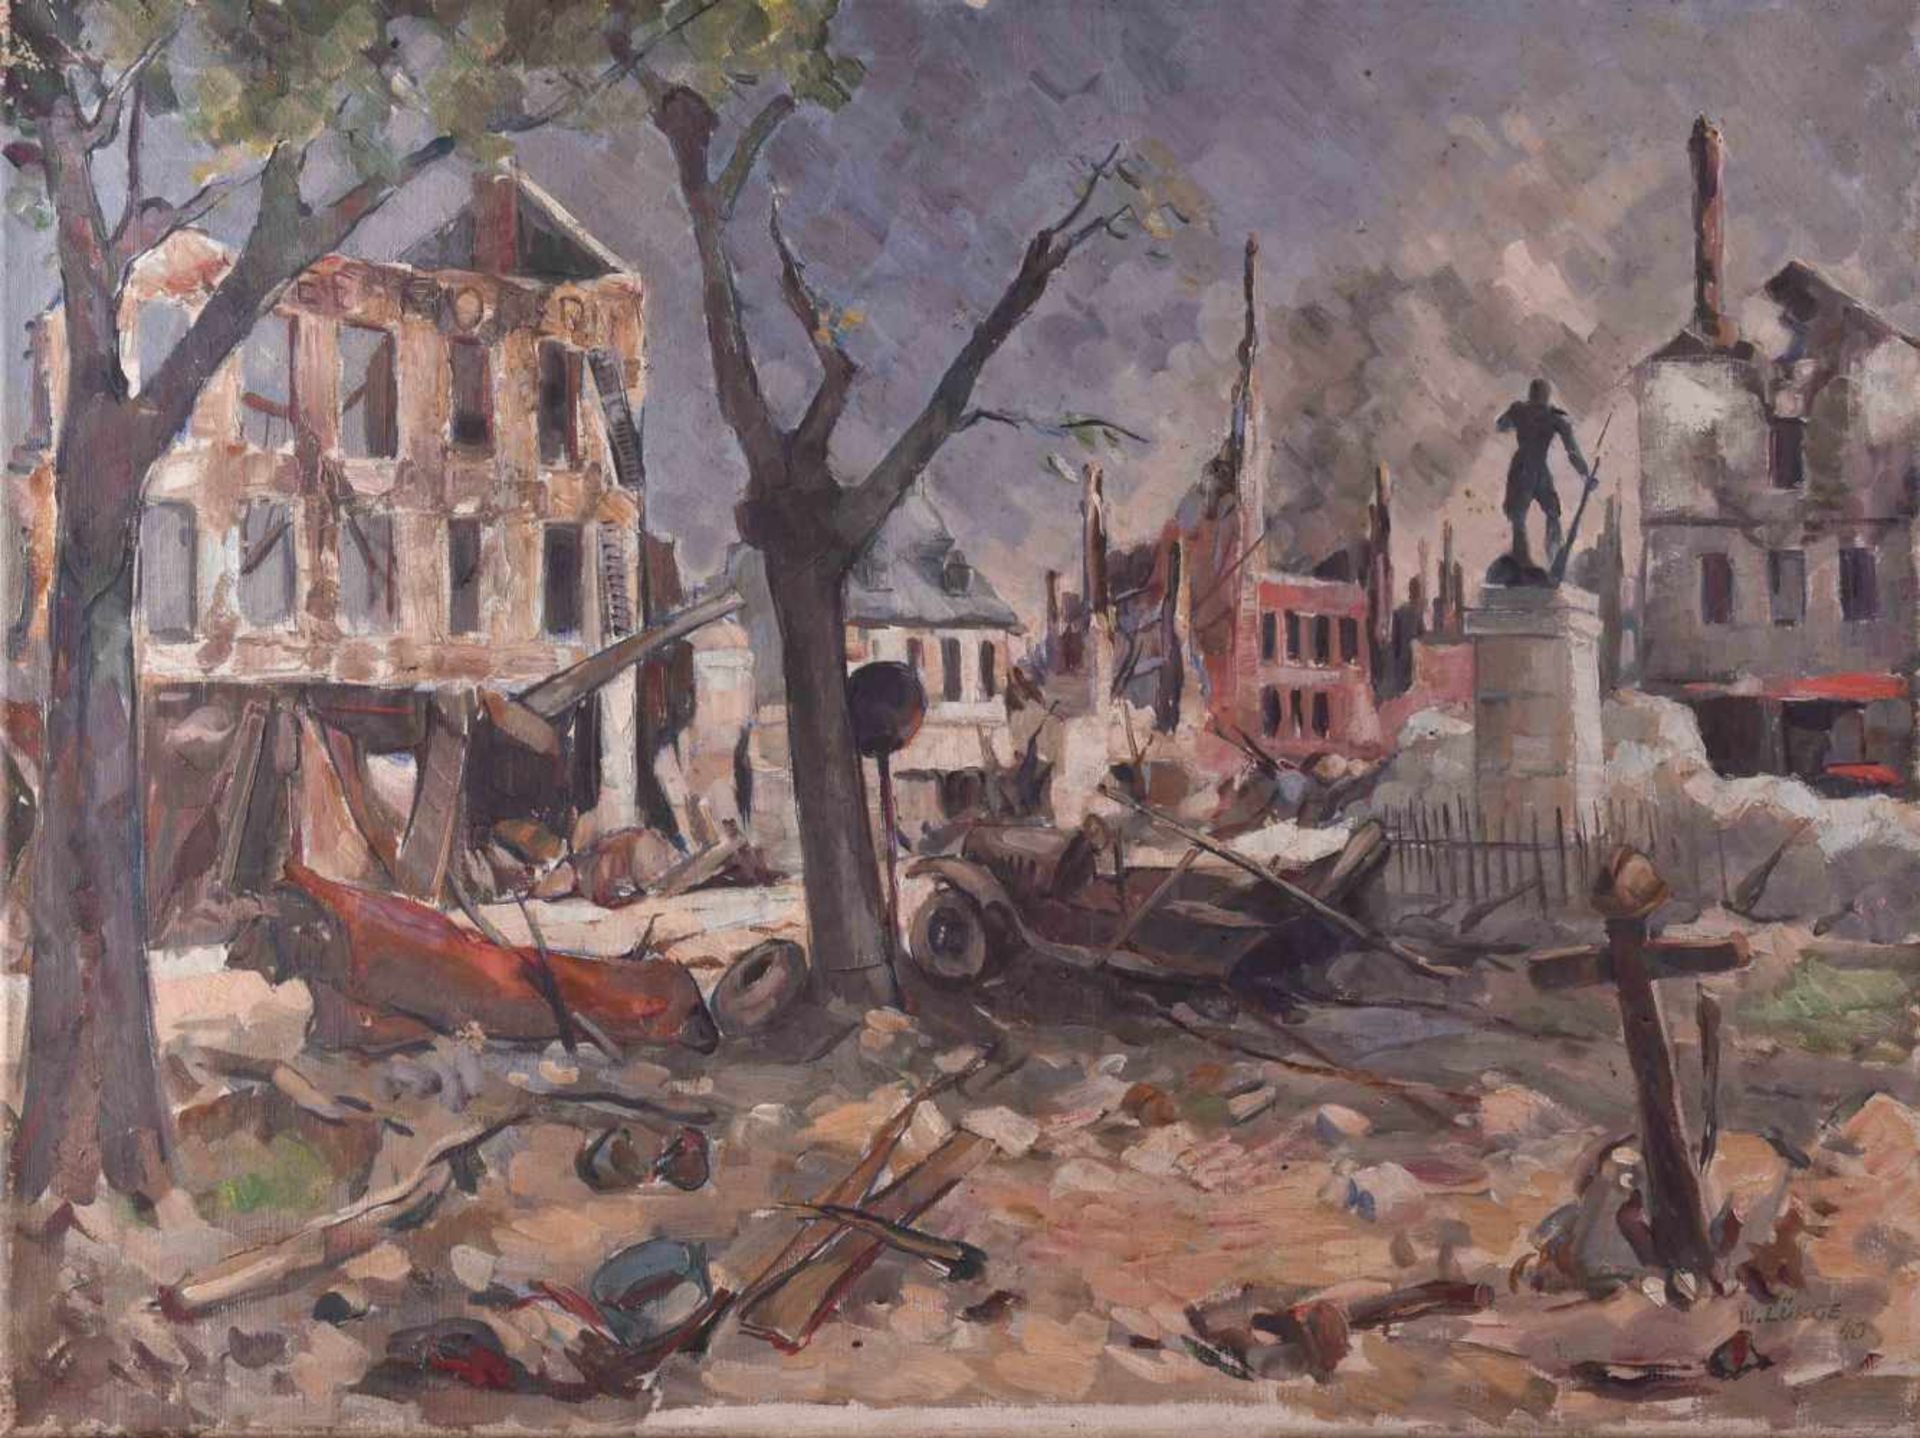 W. LÜKGE 20th century"French city after bombing"paintings oil / canvas, 60 cm x 80 cm,signed and